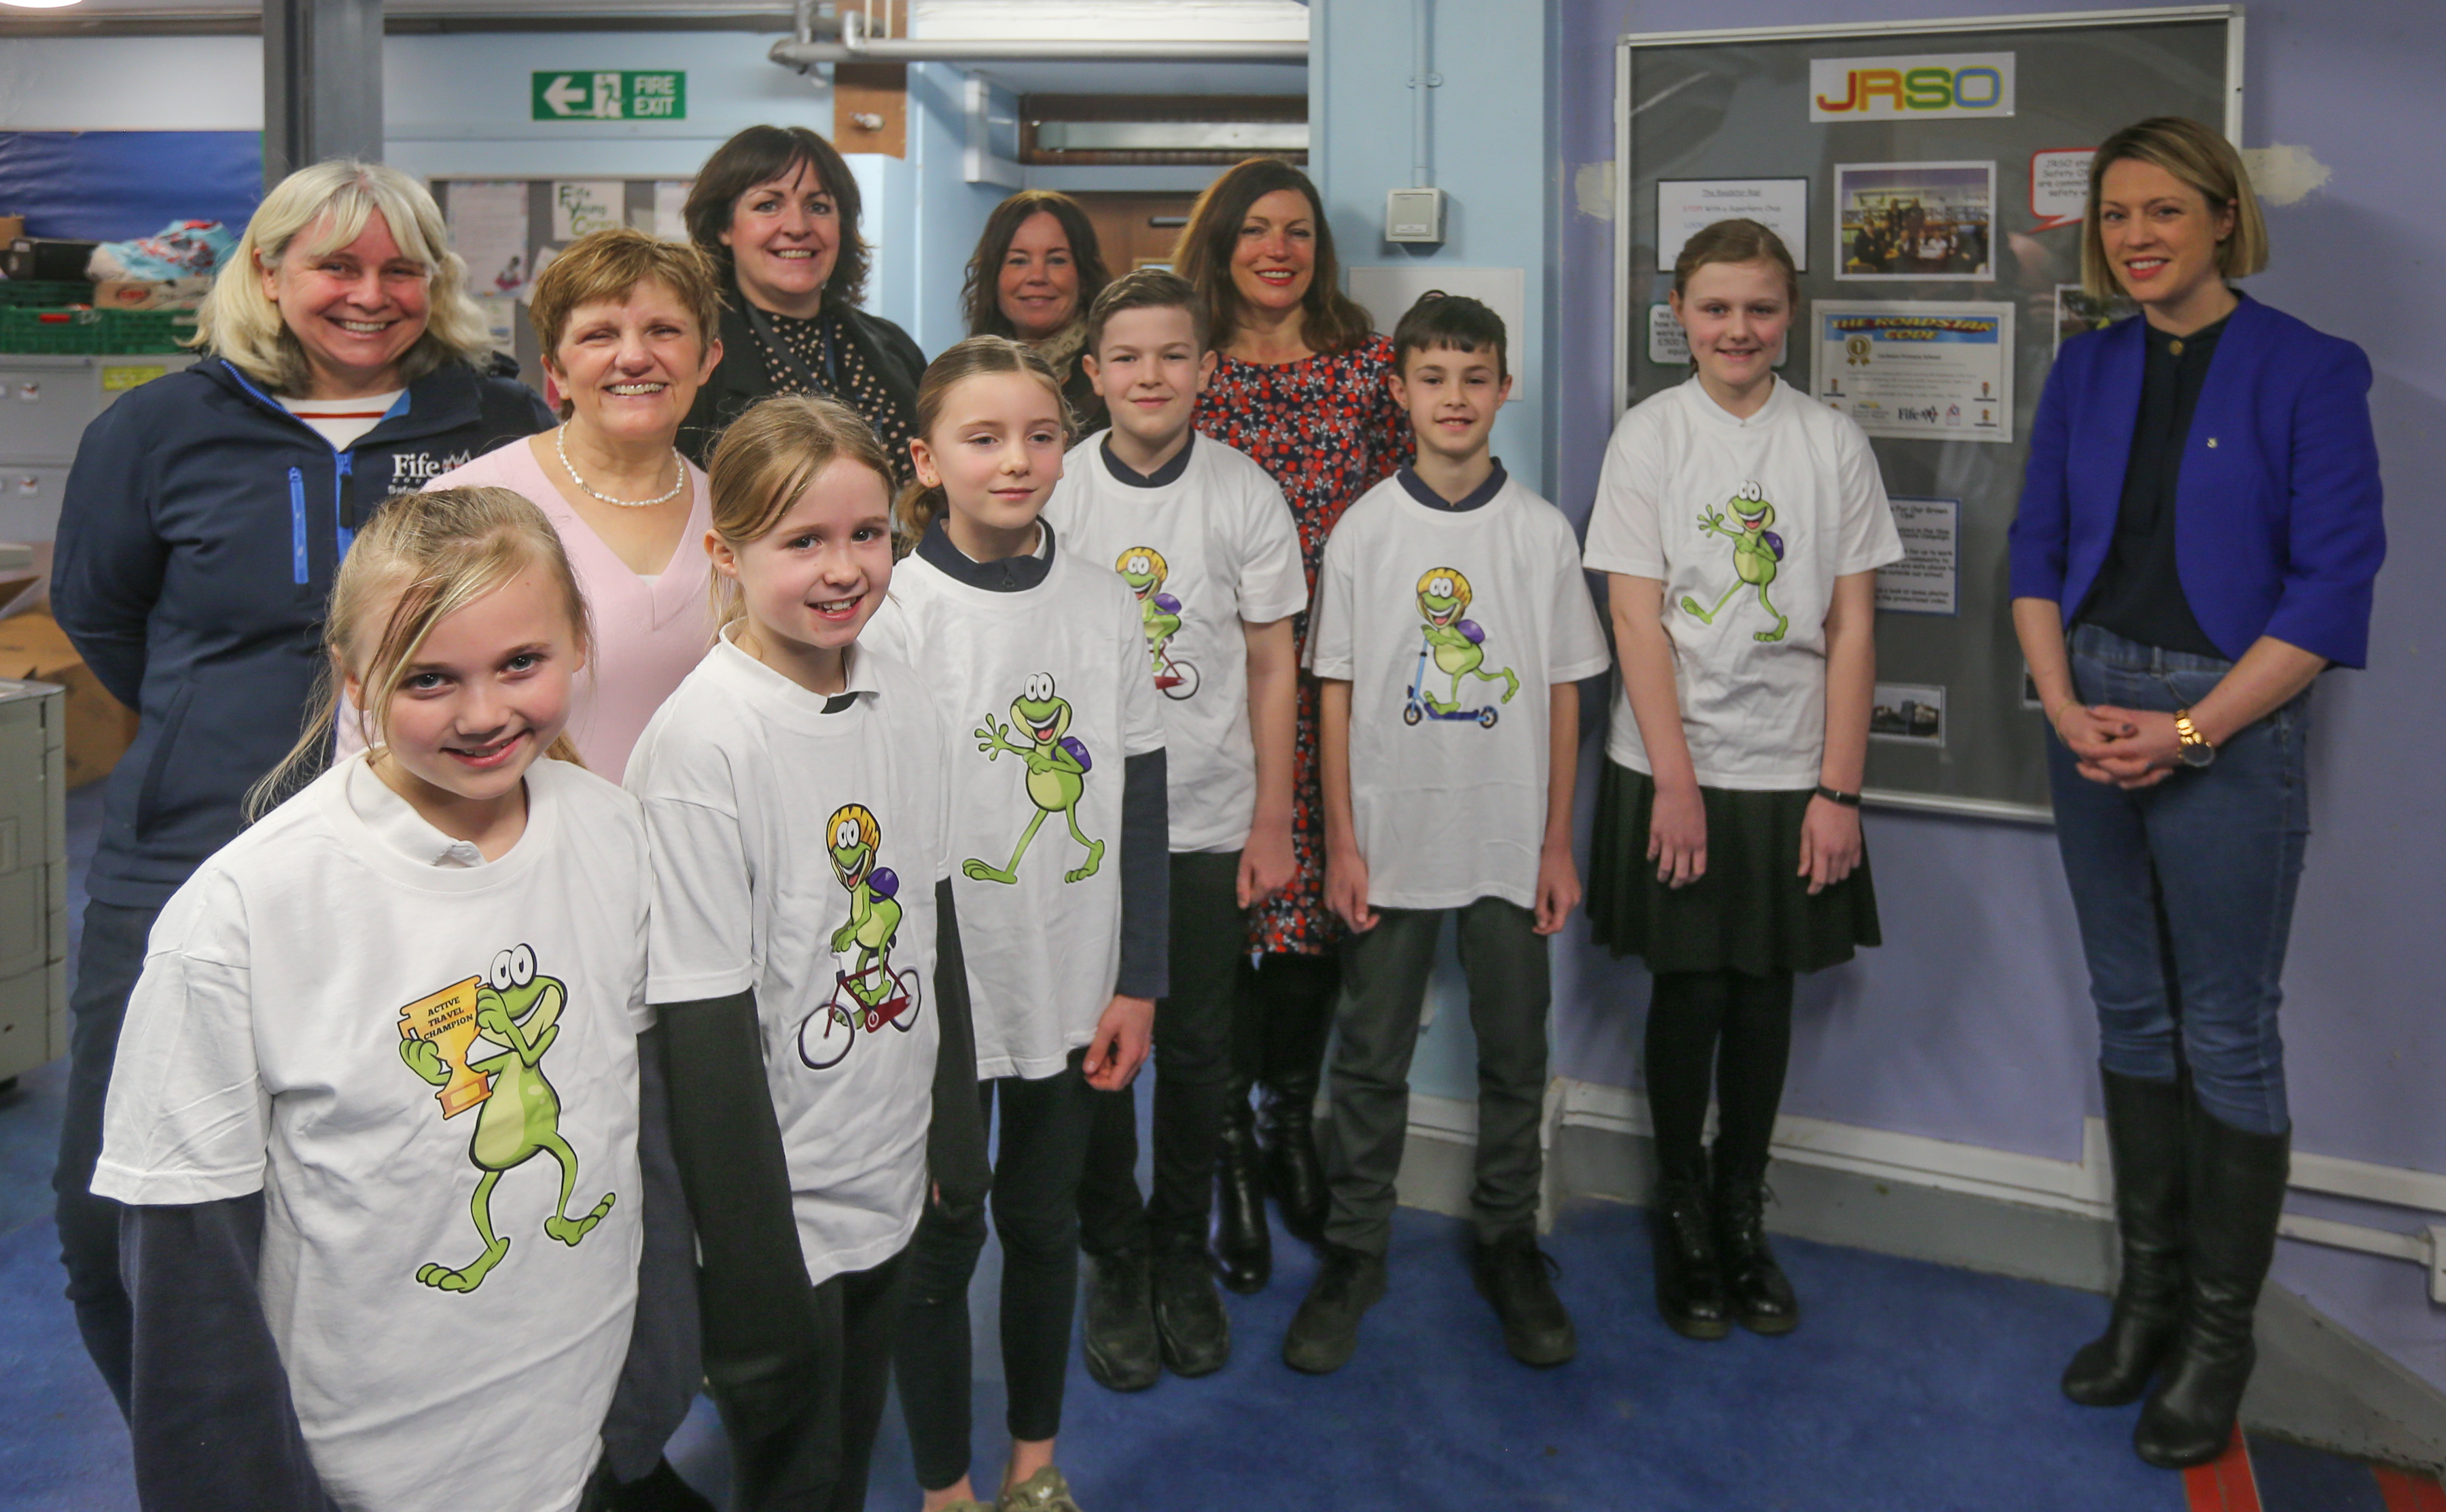 Pupils from Carleton Primary School with Jenny Gilruth, Cllr Cara Hilton and Cllr Judy Hamilton